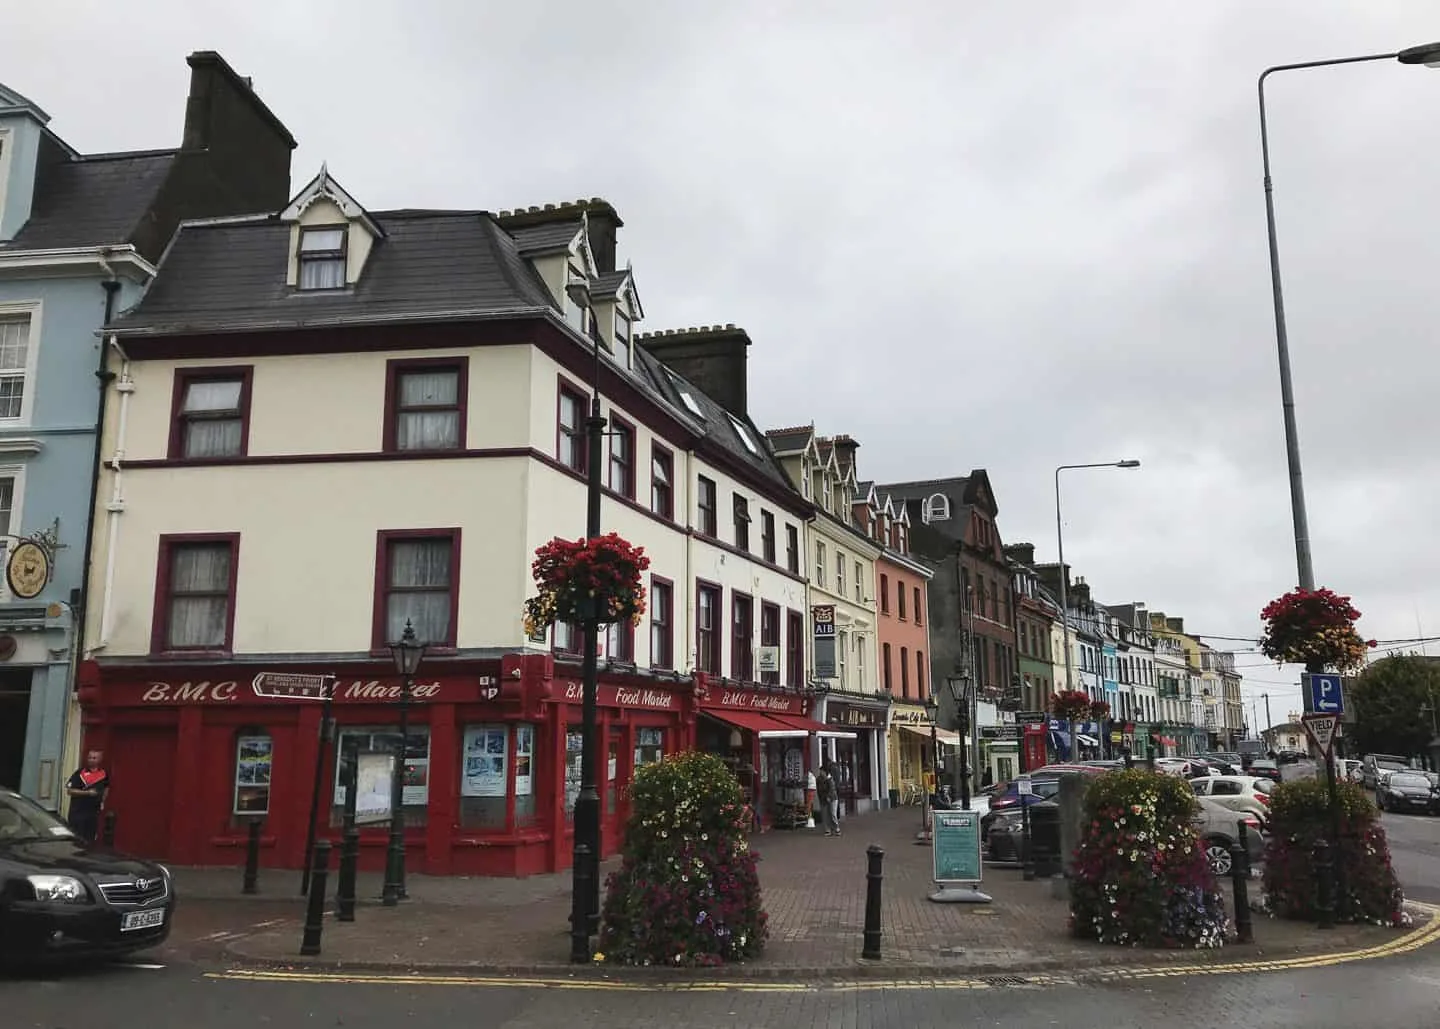 Cobh is an adorable small town worth adding to your 2 week Ireland road trip itinerary